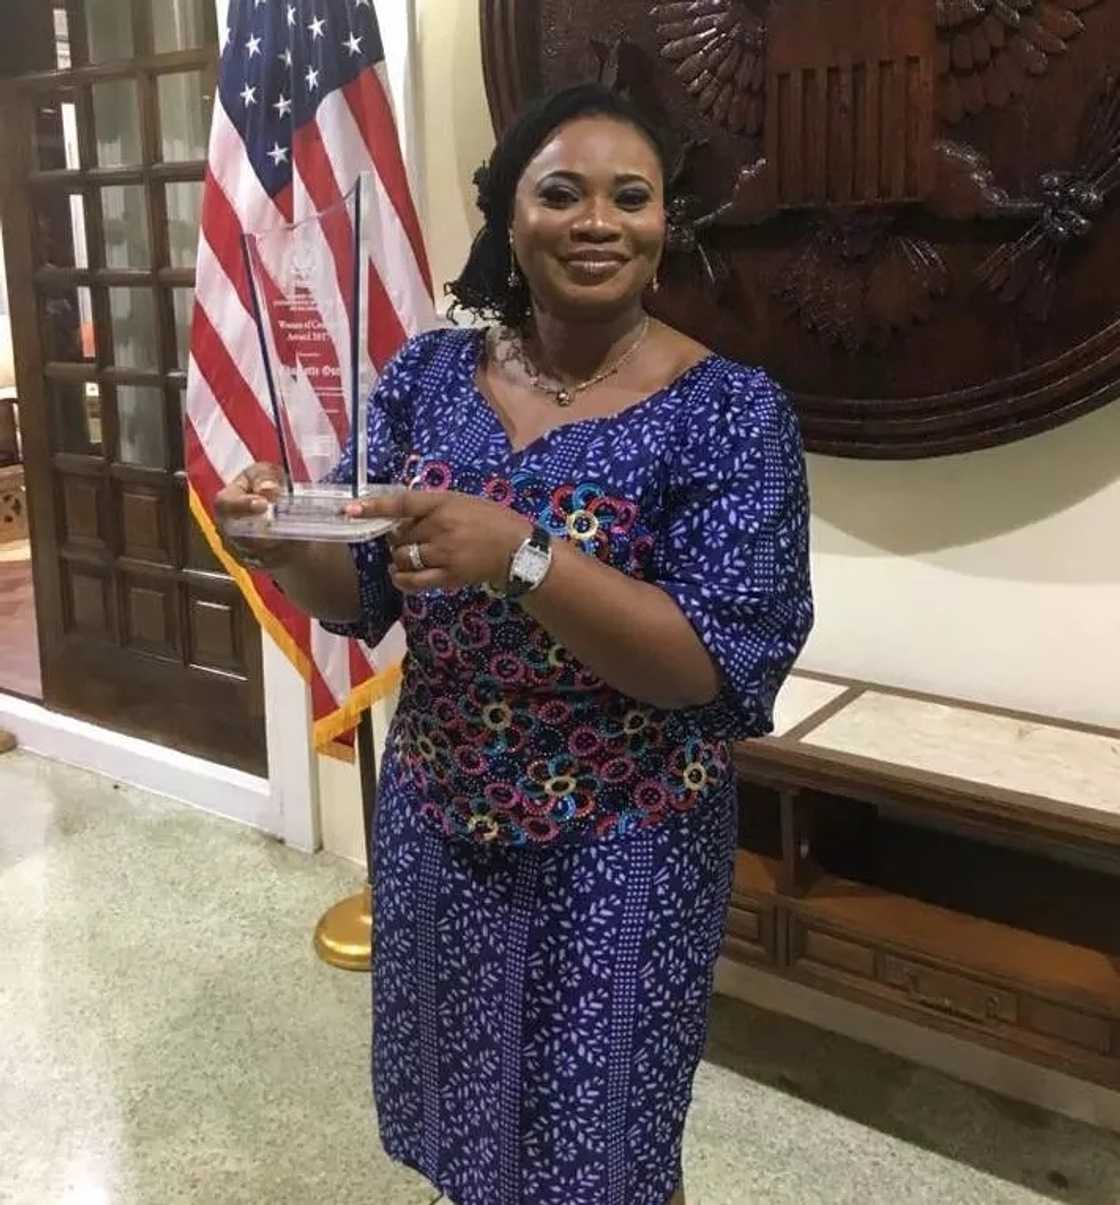 Charlotte Osei with her "Women of Courage" award